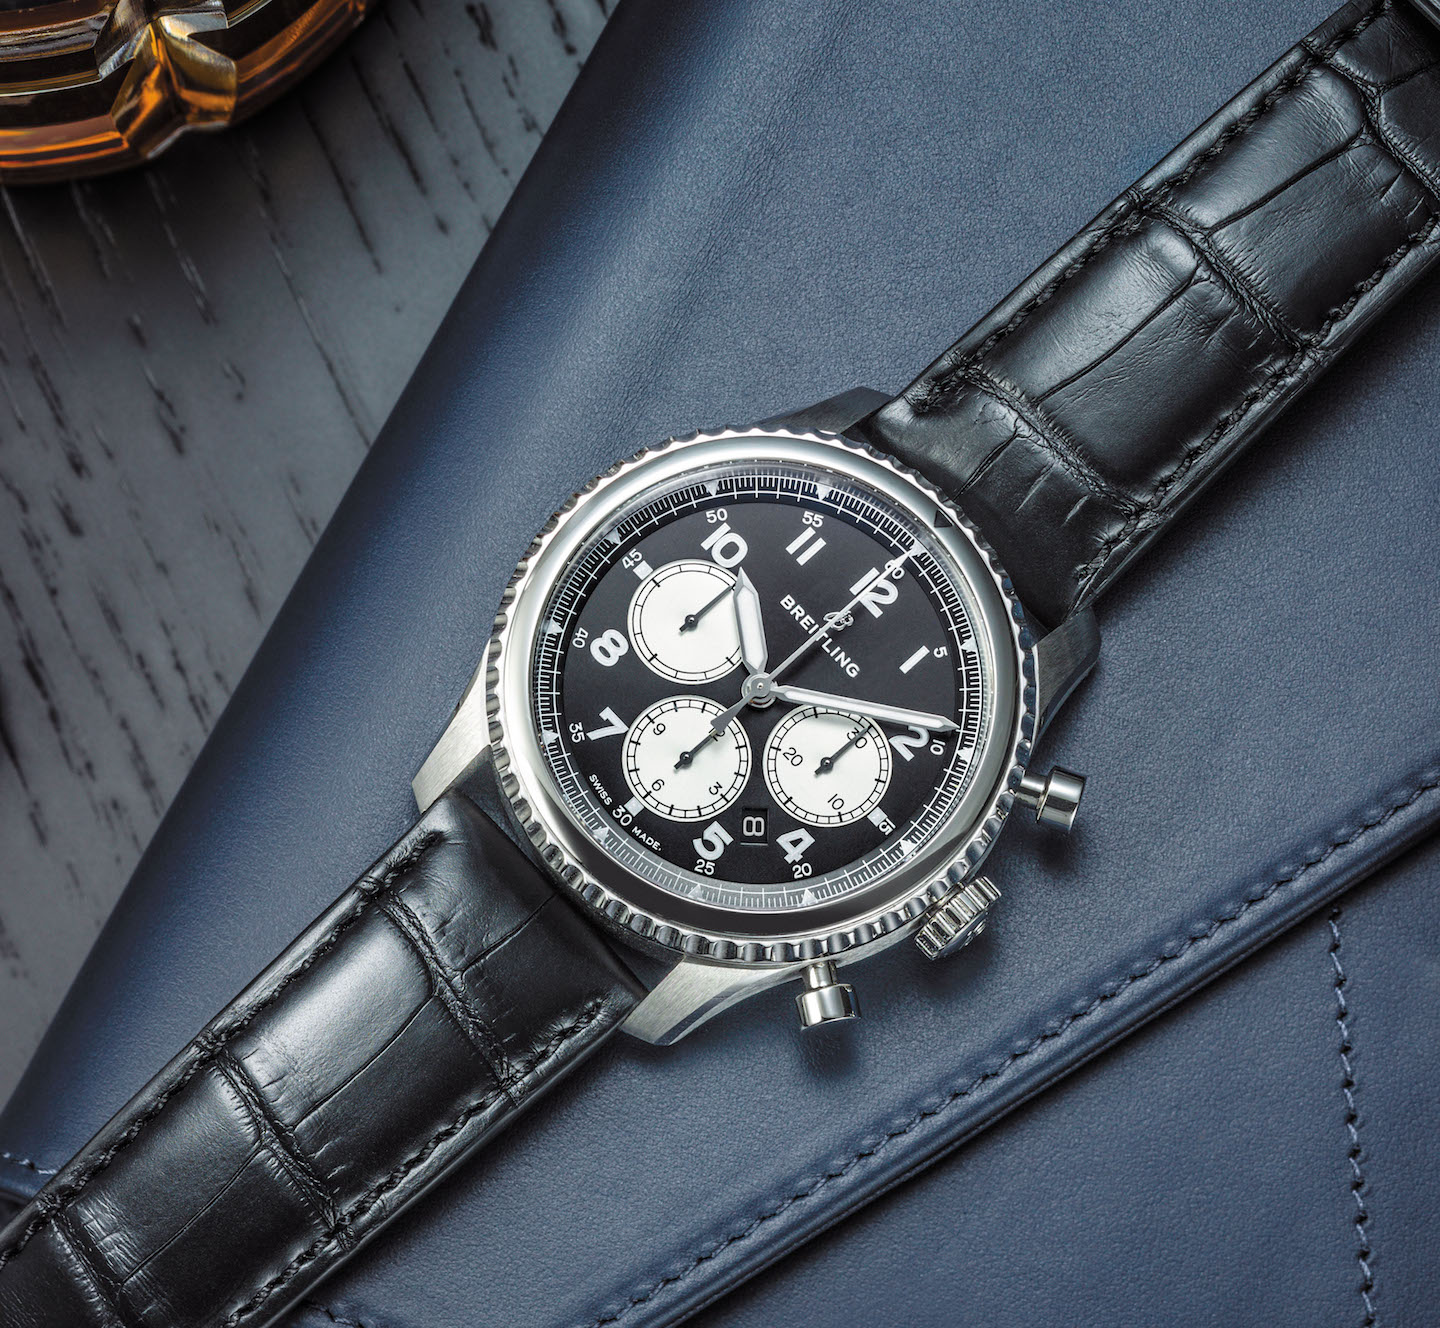 New Breitling Navitimer 8 Watch Collection